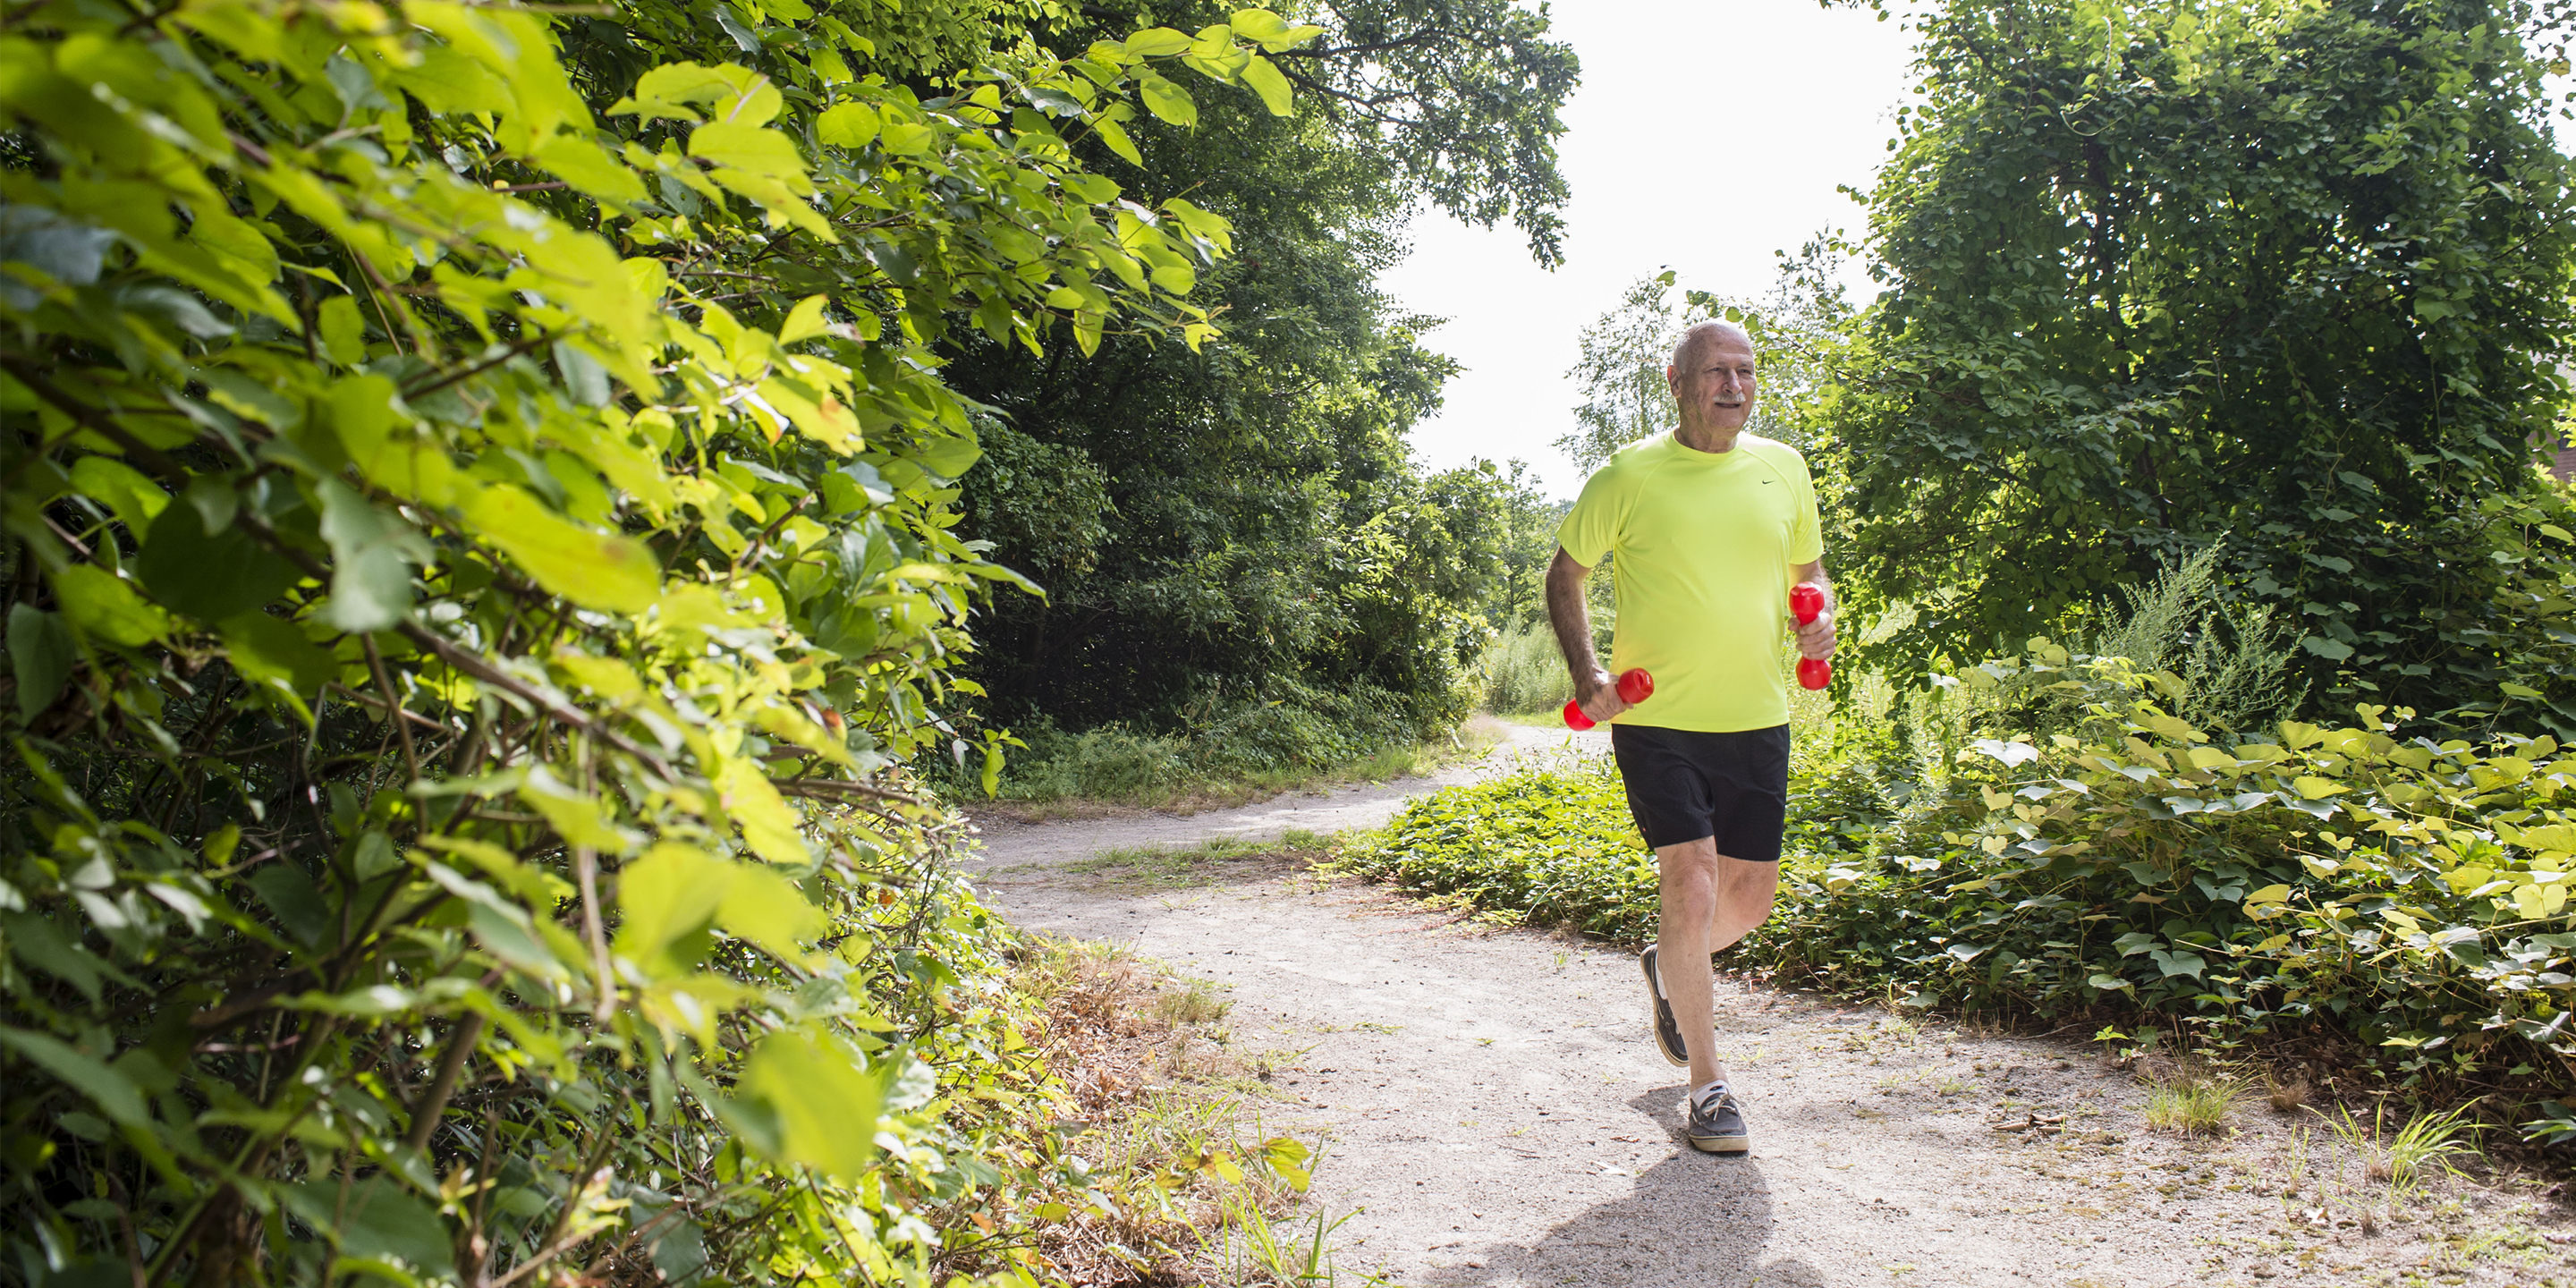 Older man with weights running on gravel path outside with trees.